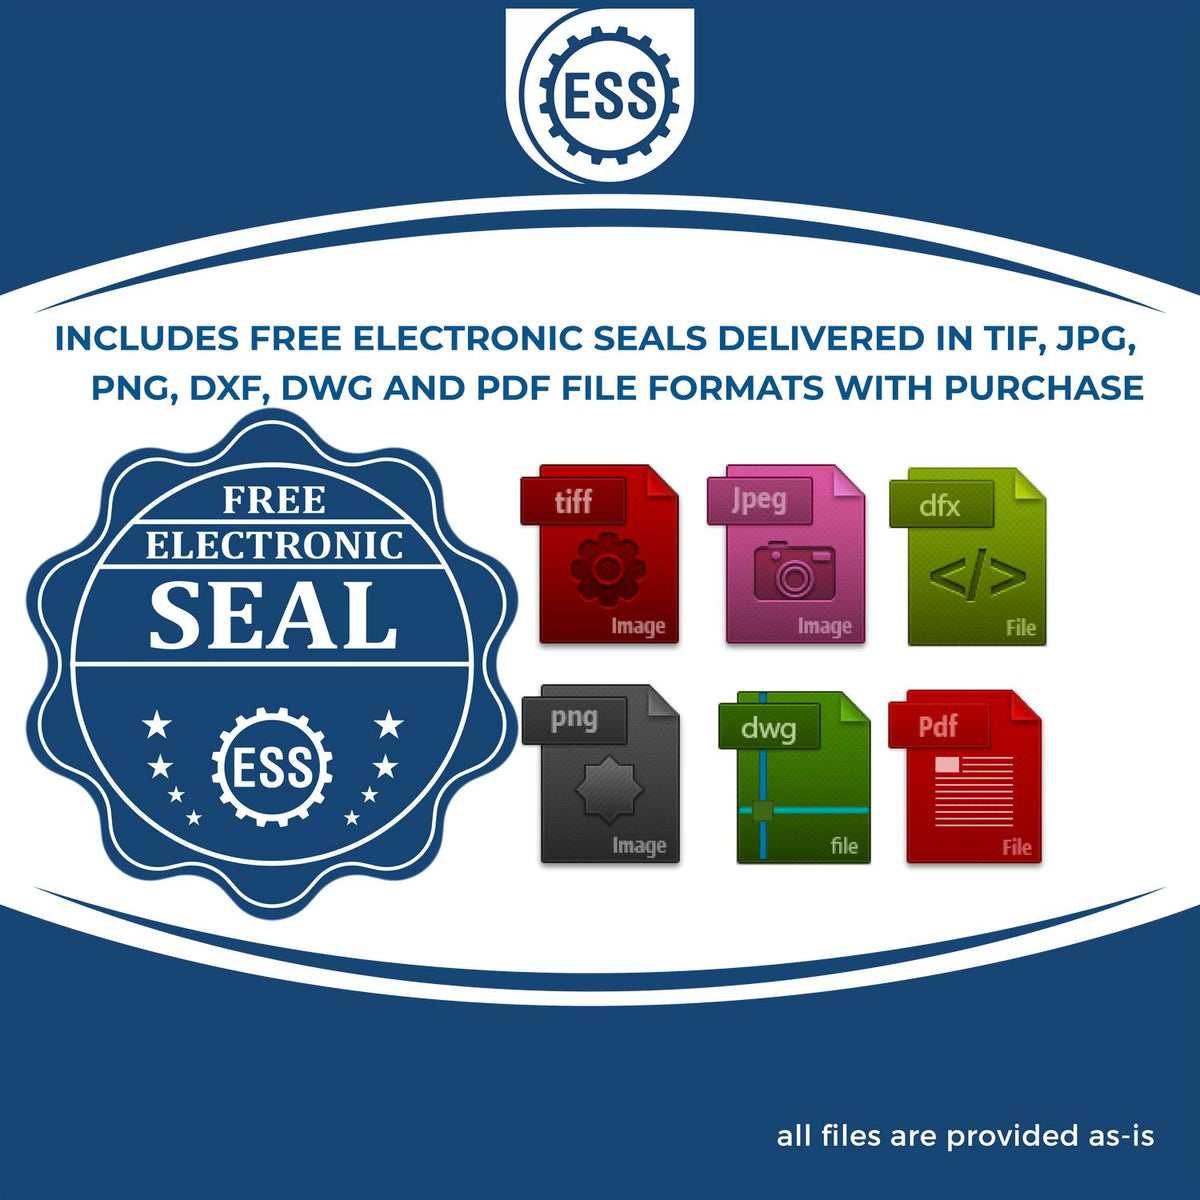 An infographic for the free electronic seal for the Hybrid Wyoming Architect Seal illustrating the different file type icons such as DXF, DWG, TIF, JPG and PNG.